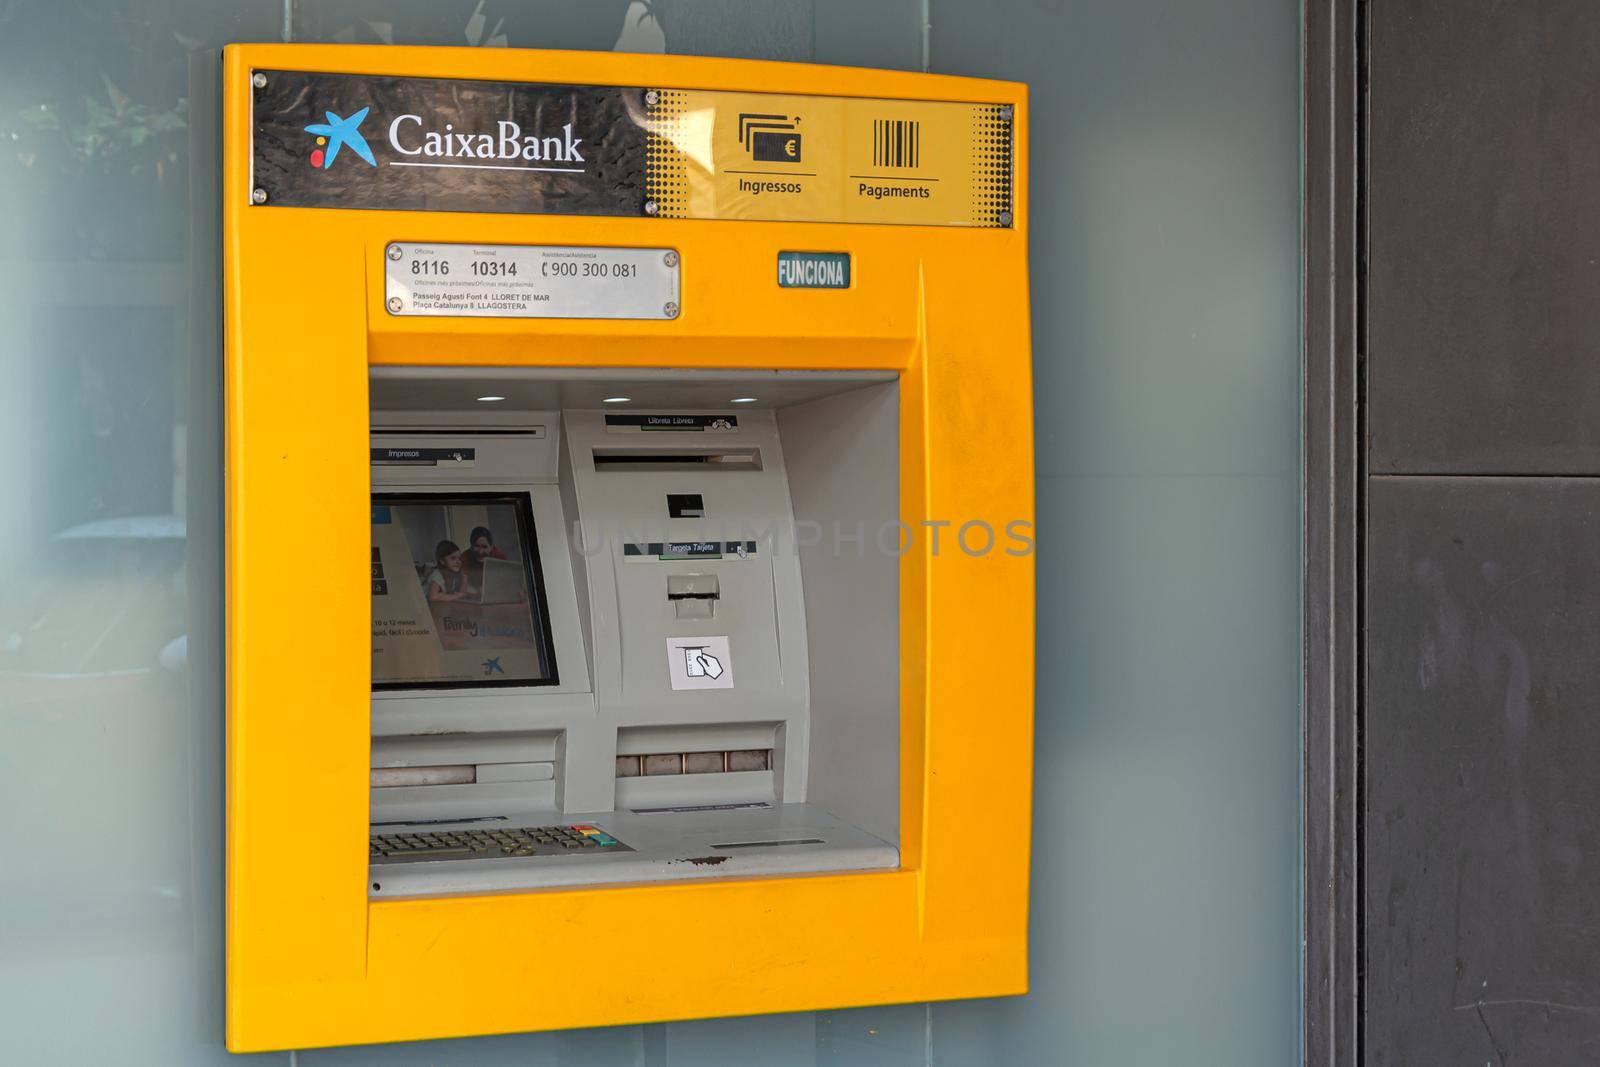 Tossa, Spain - 09/19/2017: through the Wall ATM for cash withdrawal. Stock photo.